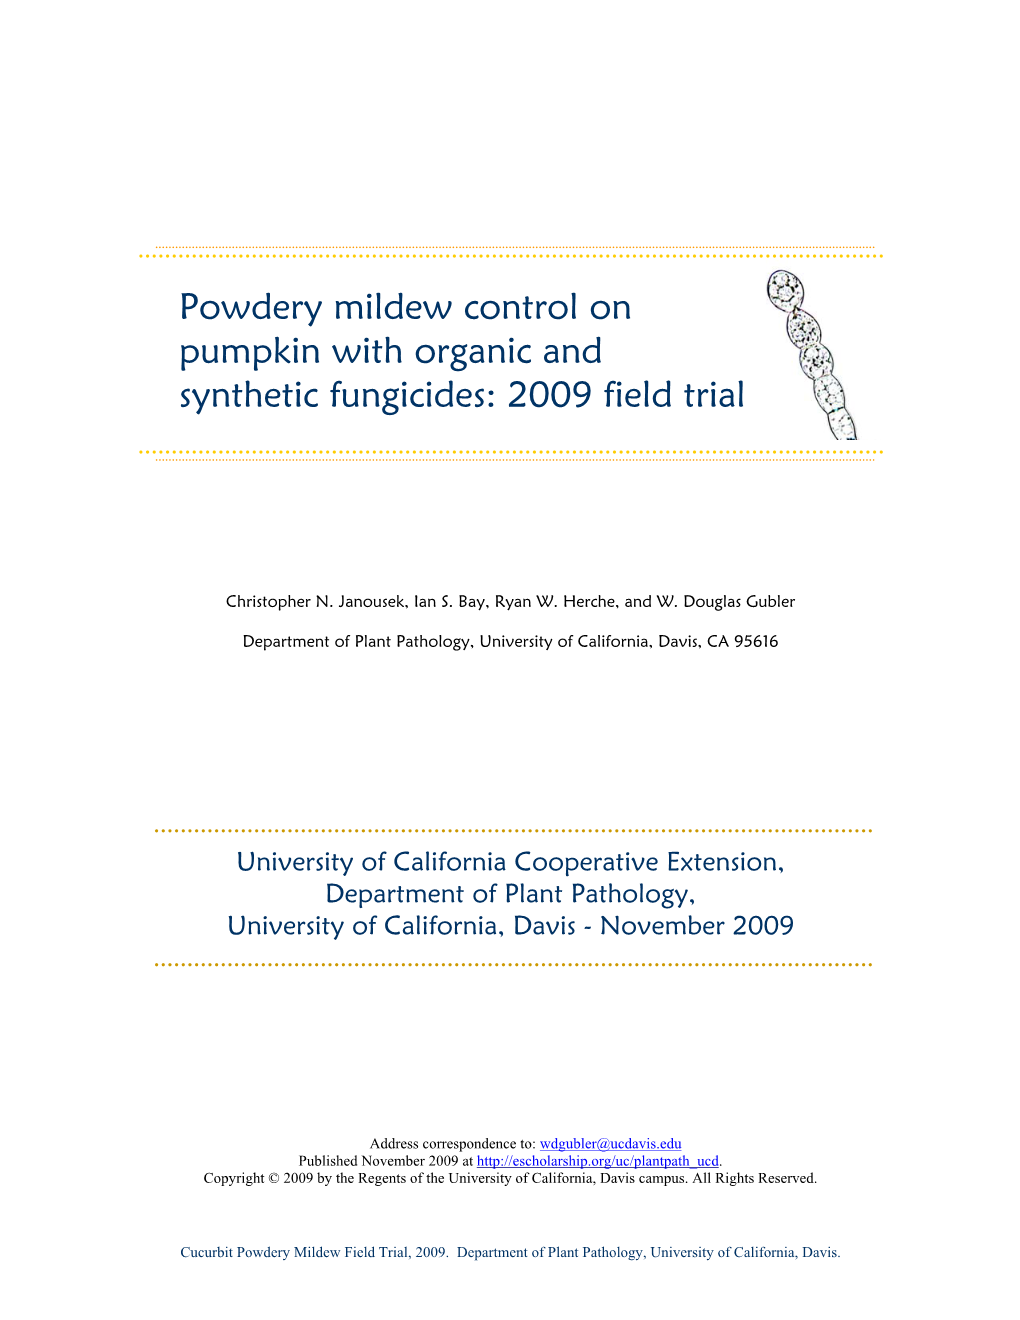 Powdery Mildew Control on Pumpkin with Organic and Synthetic Fungicides: 2009 Field Trial